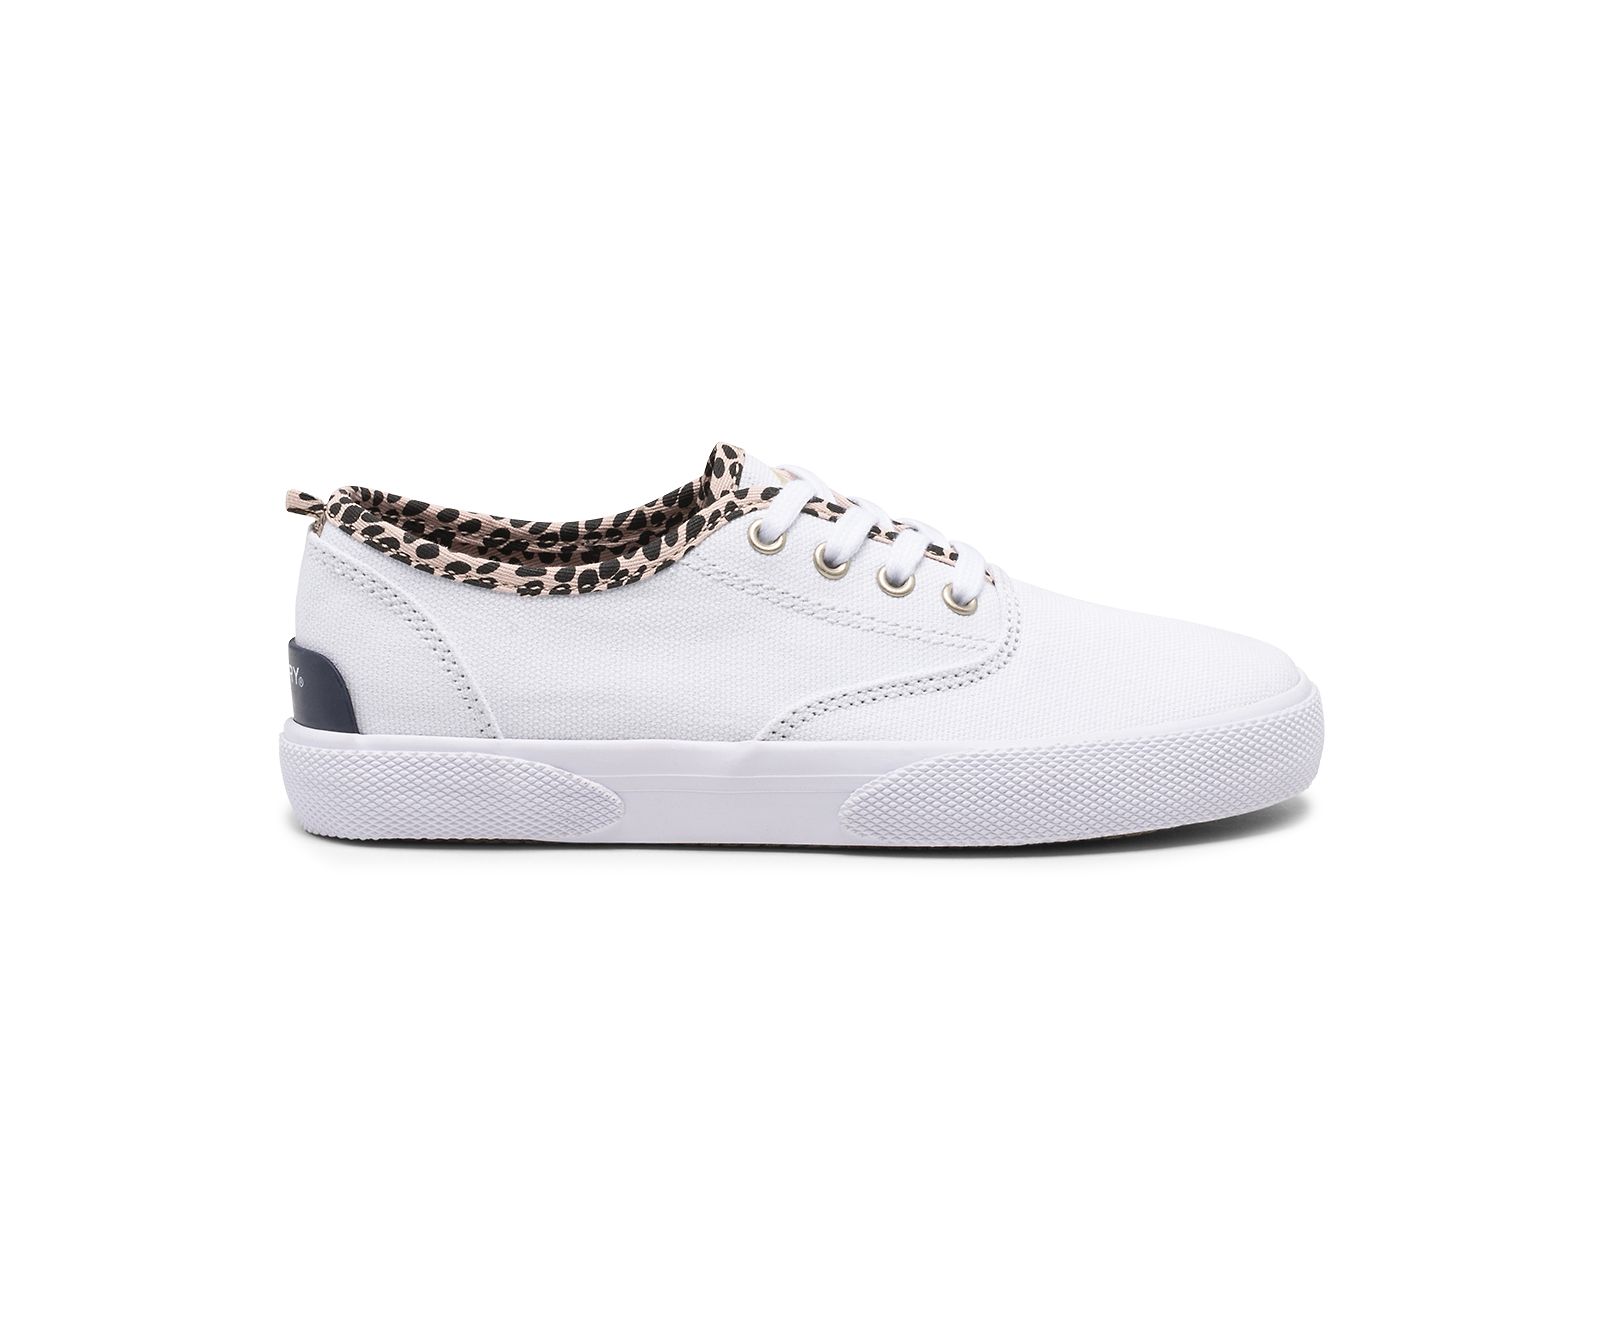 Big Kid's Pier Wave CVO Washable Sneaker - White/Leopard - Click Image to Close